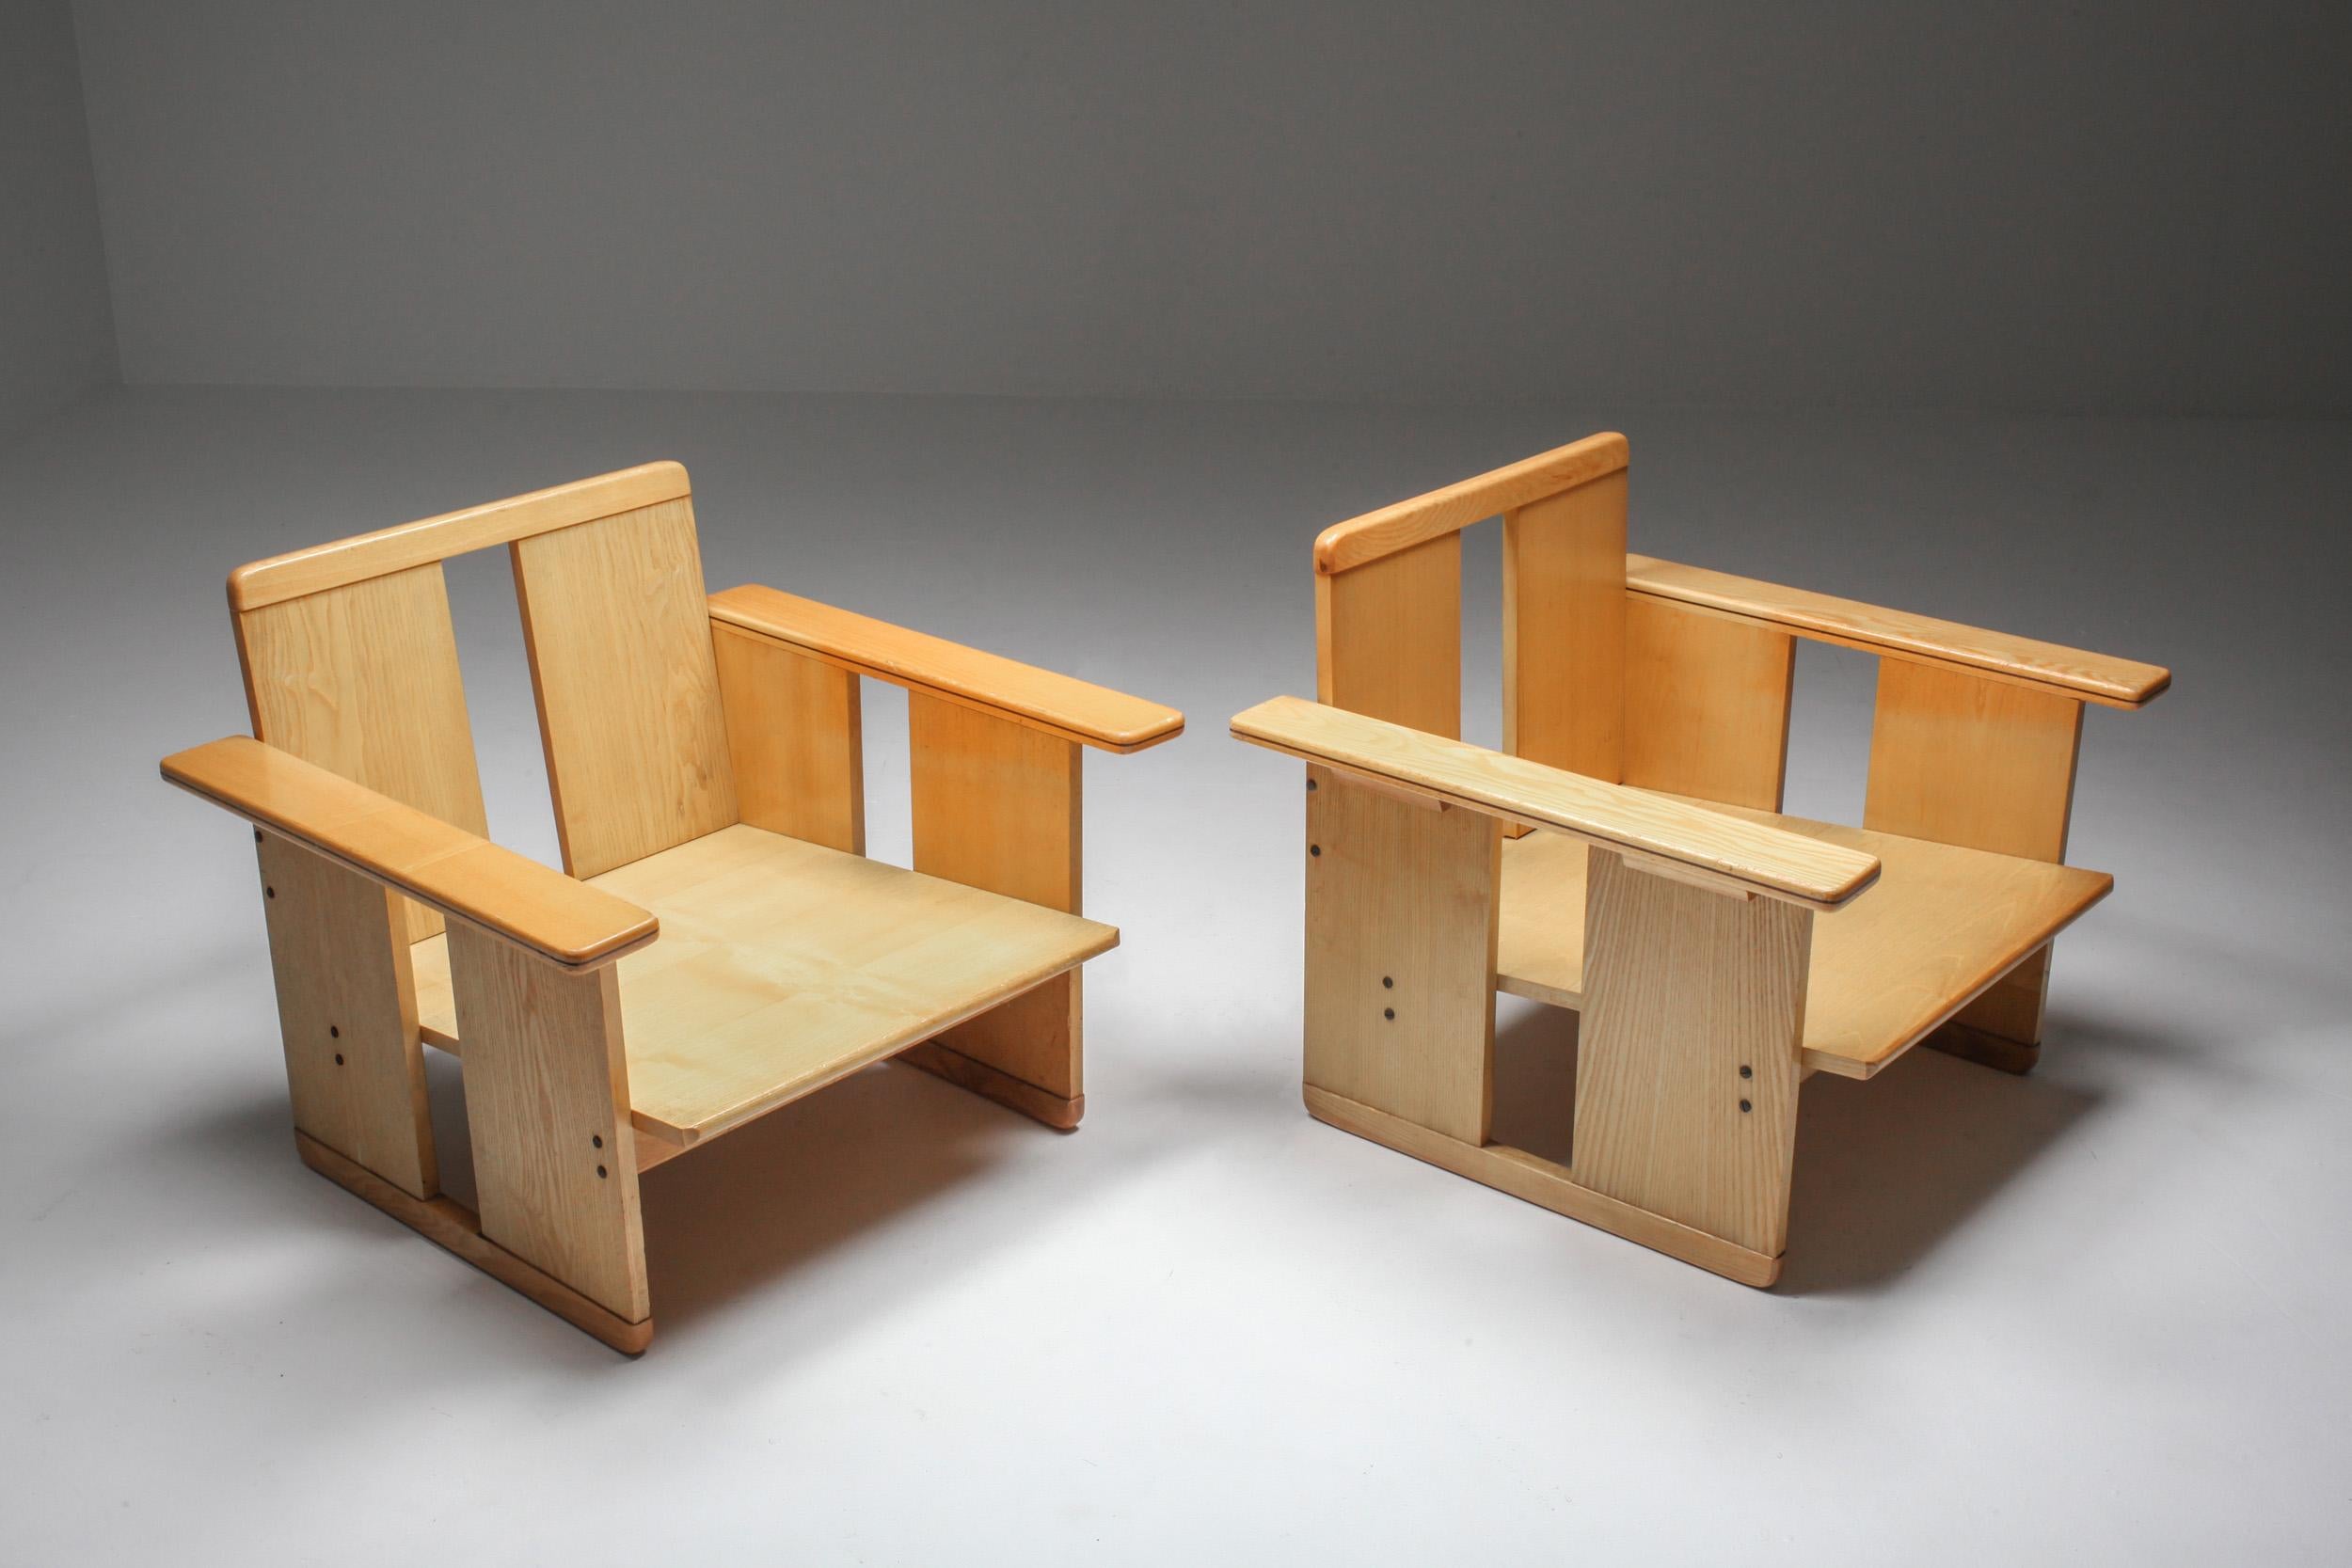 Afra and Tobia Scarpa, crate chairs, artona series, Maxalto, Italy, 1970s.

Postmodern armchairs by the famous children of Carlo Scarpa.
Inspired by Donald Judd and Rietveld, Afra e Tobia Scarpa designed these Minimalist pieces.
   